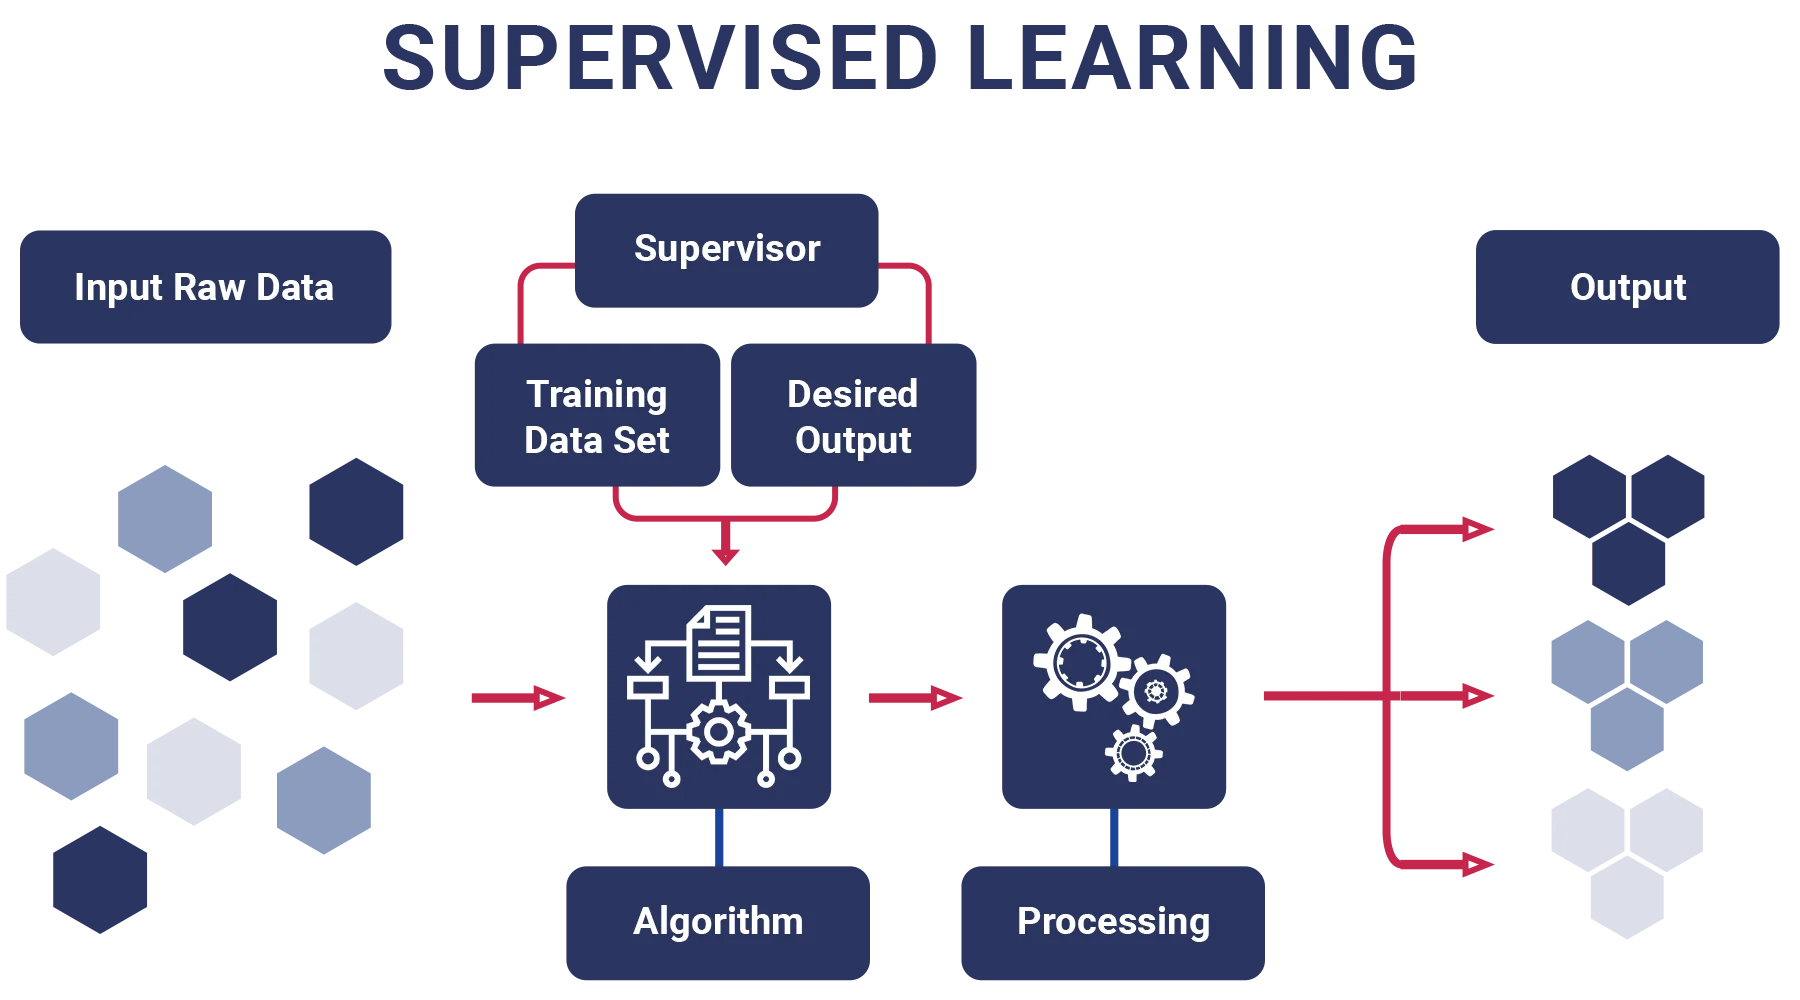 supervised learning